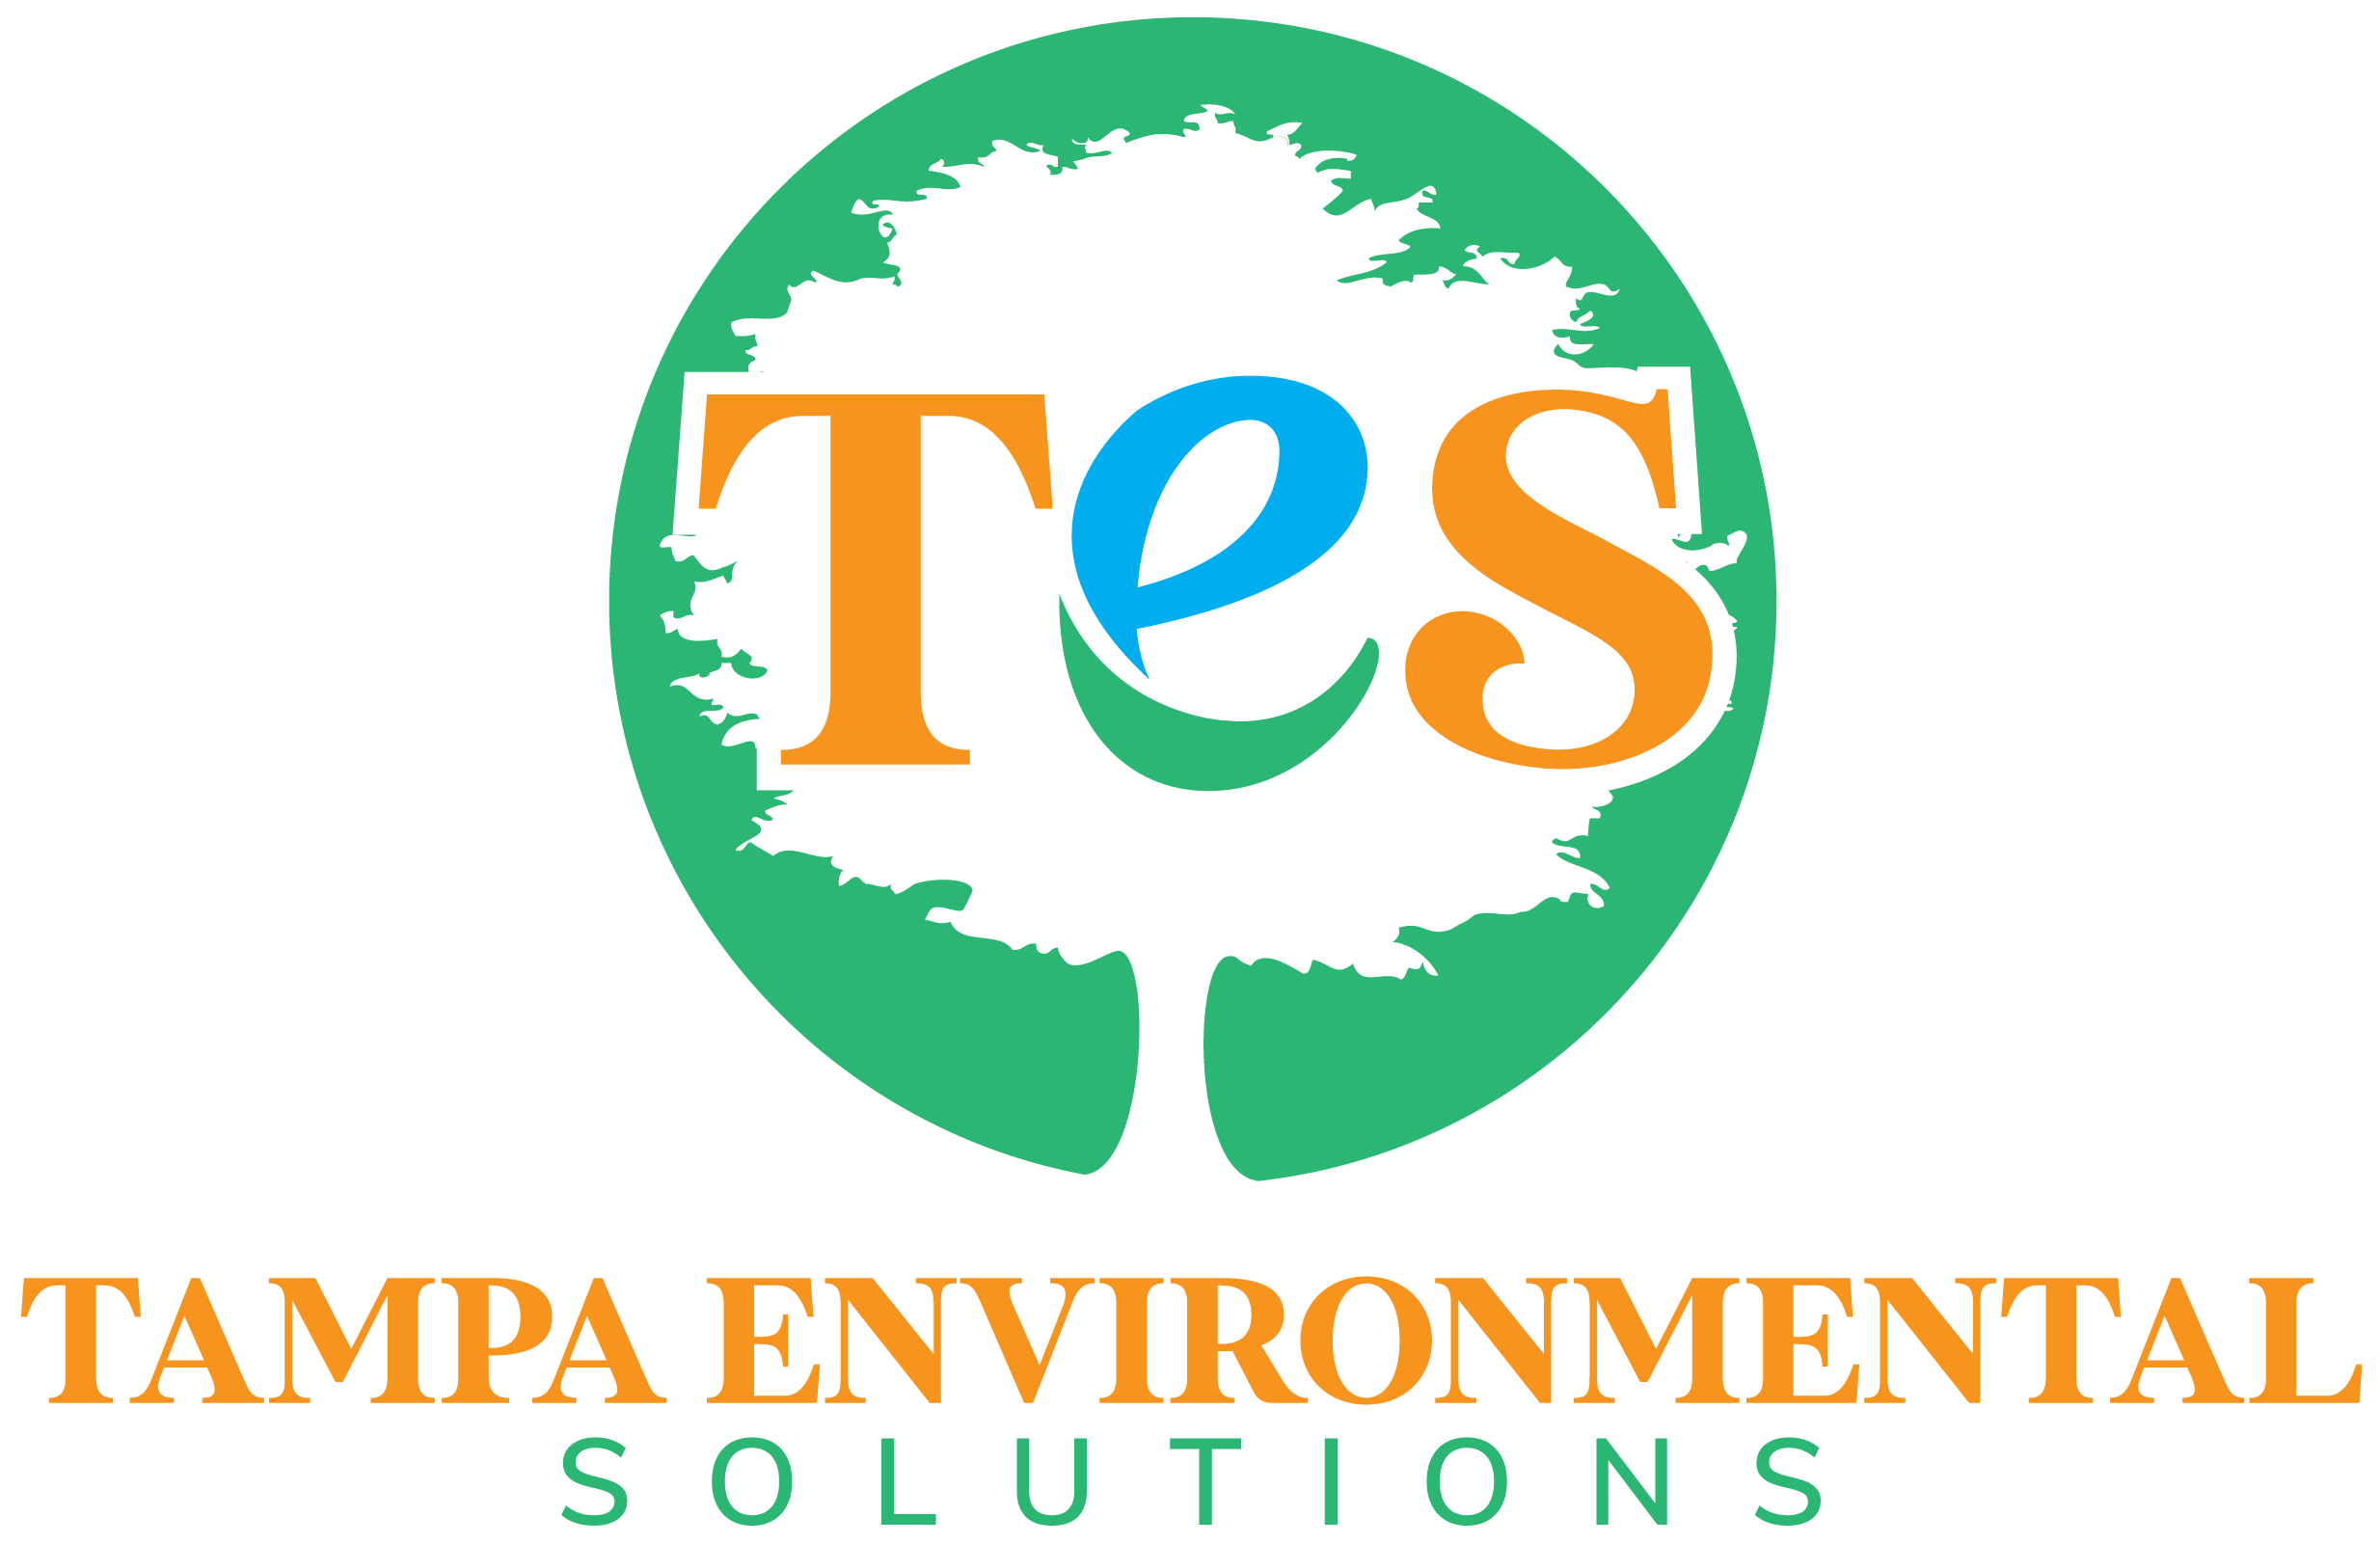 Tampa Environment solutions